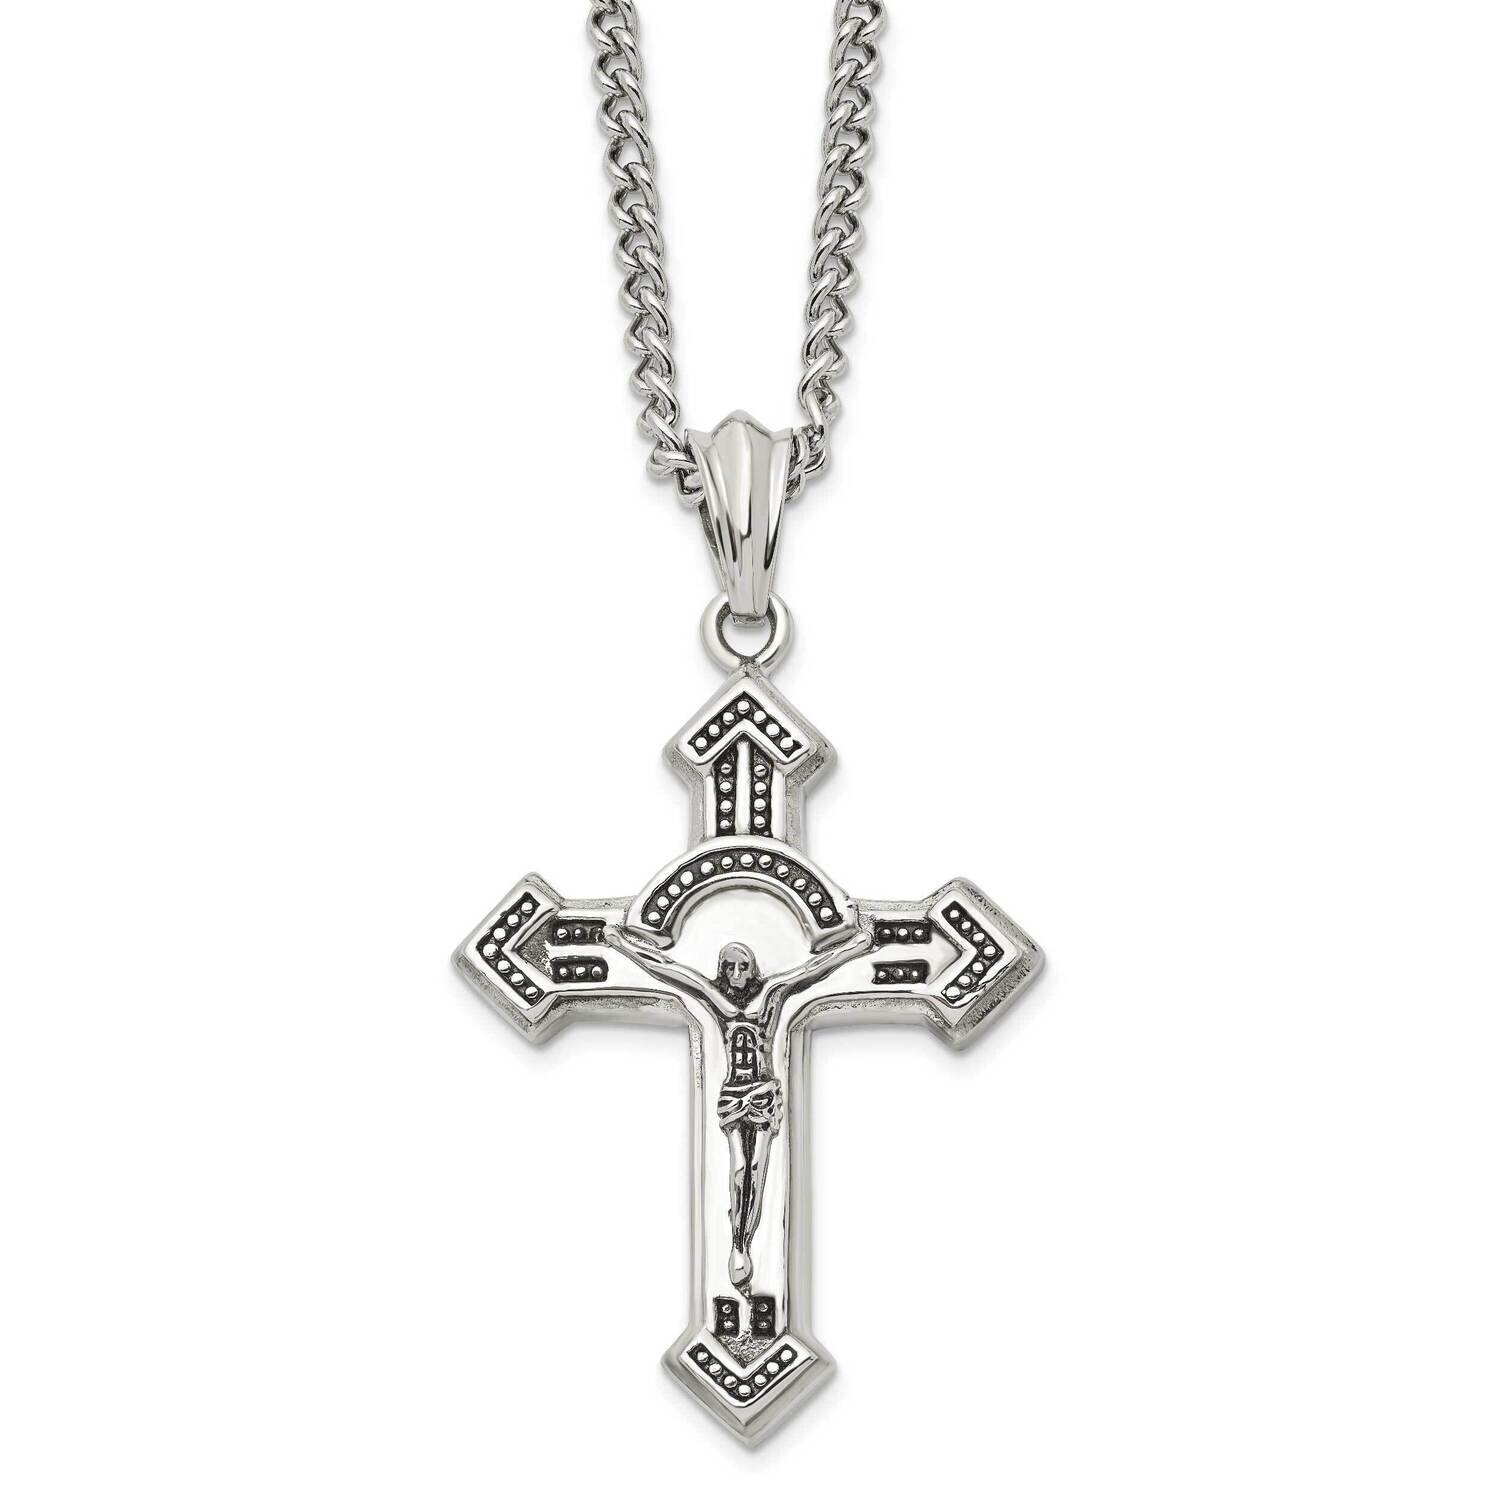 Antiqued & Polished Crucifix 24 Inch Necklace Stainless Steel SRN1158-24